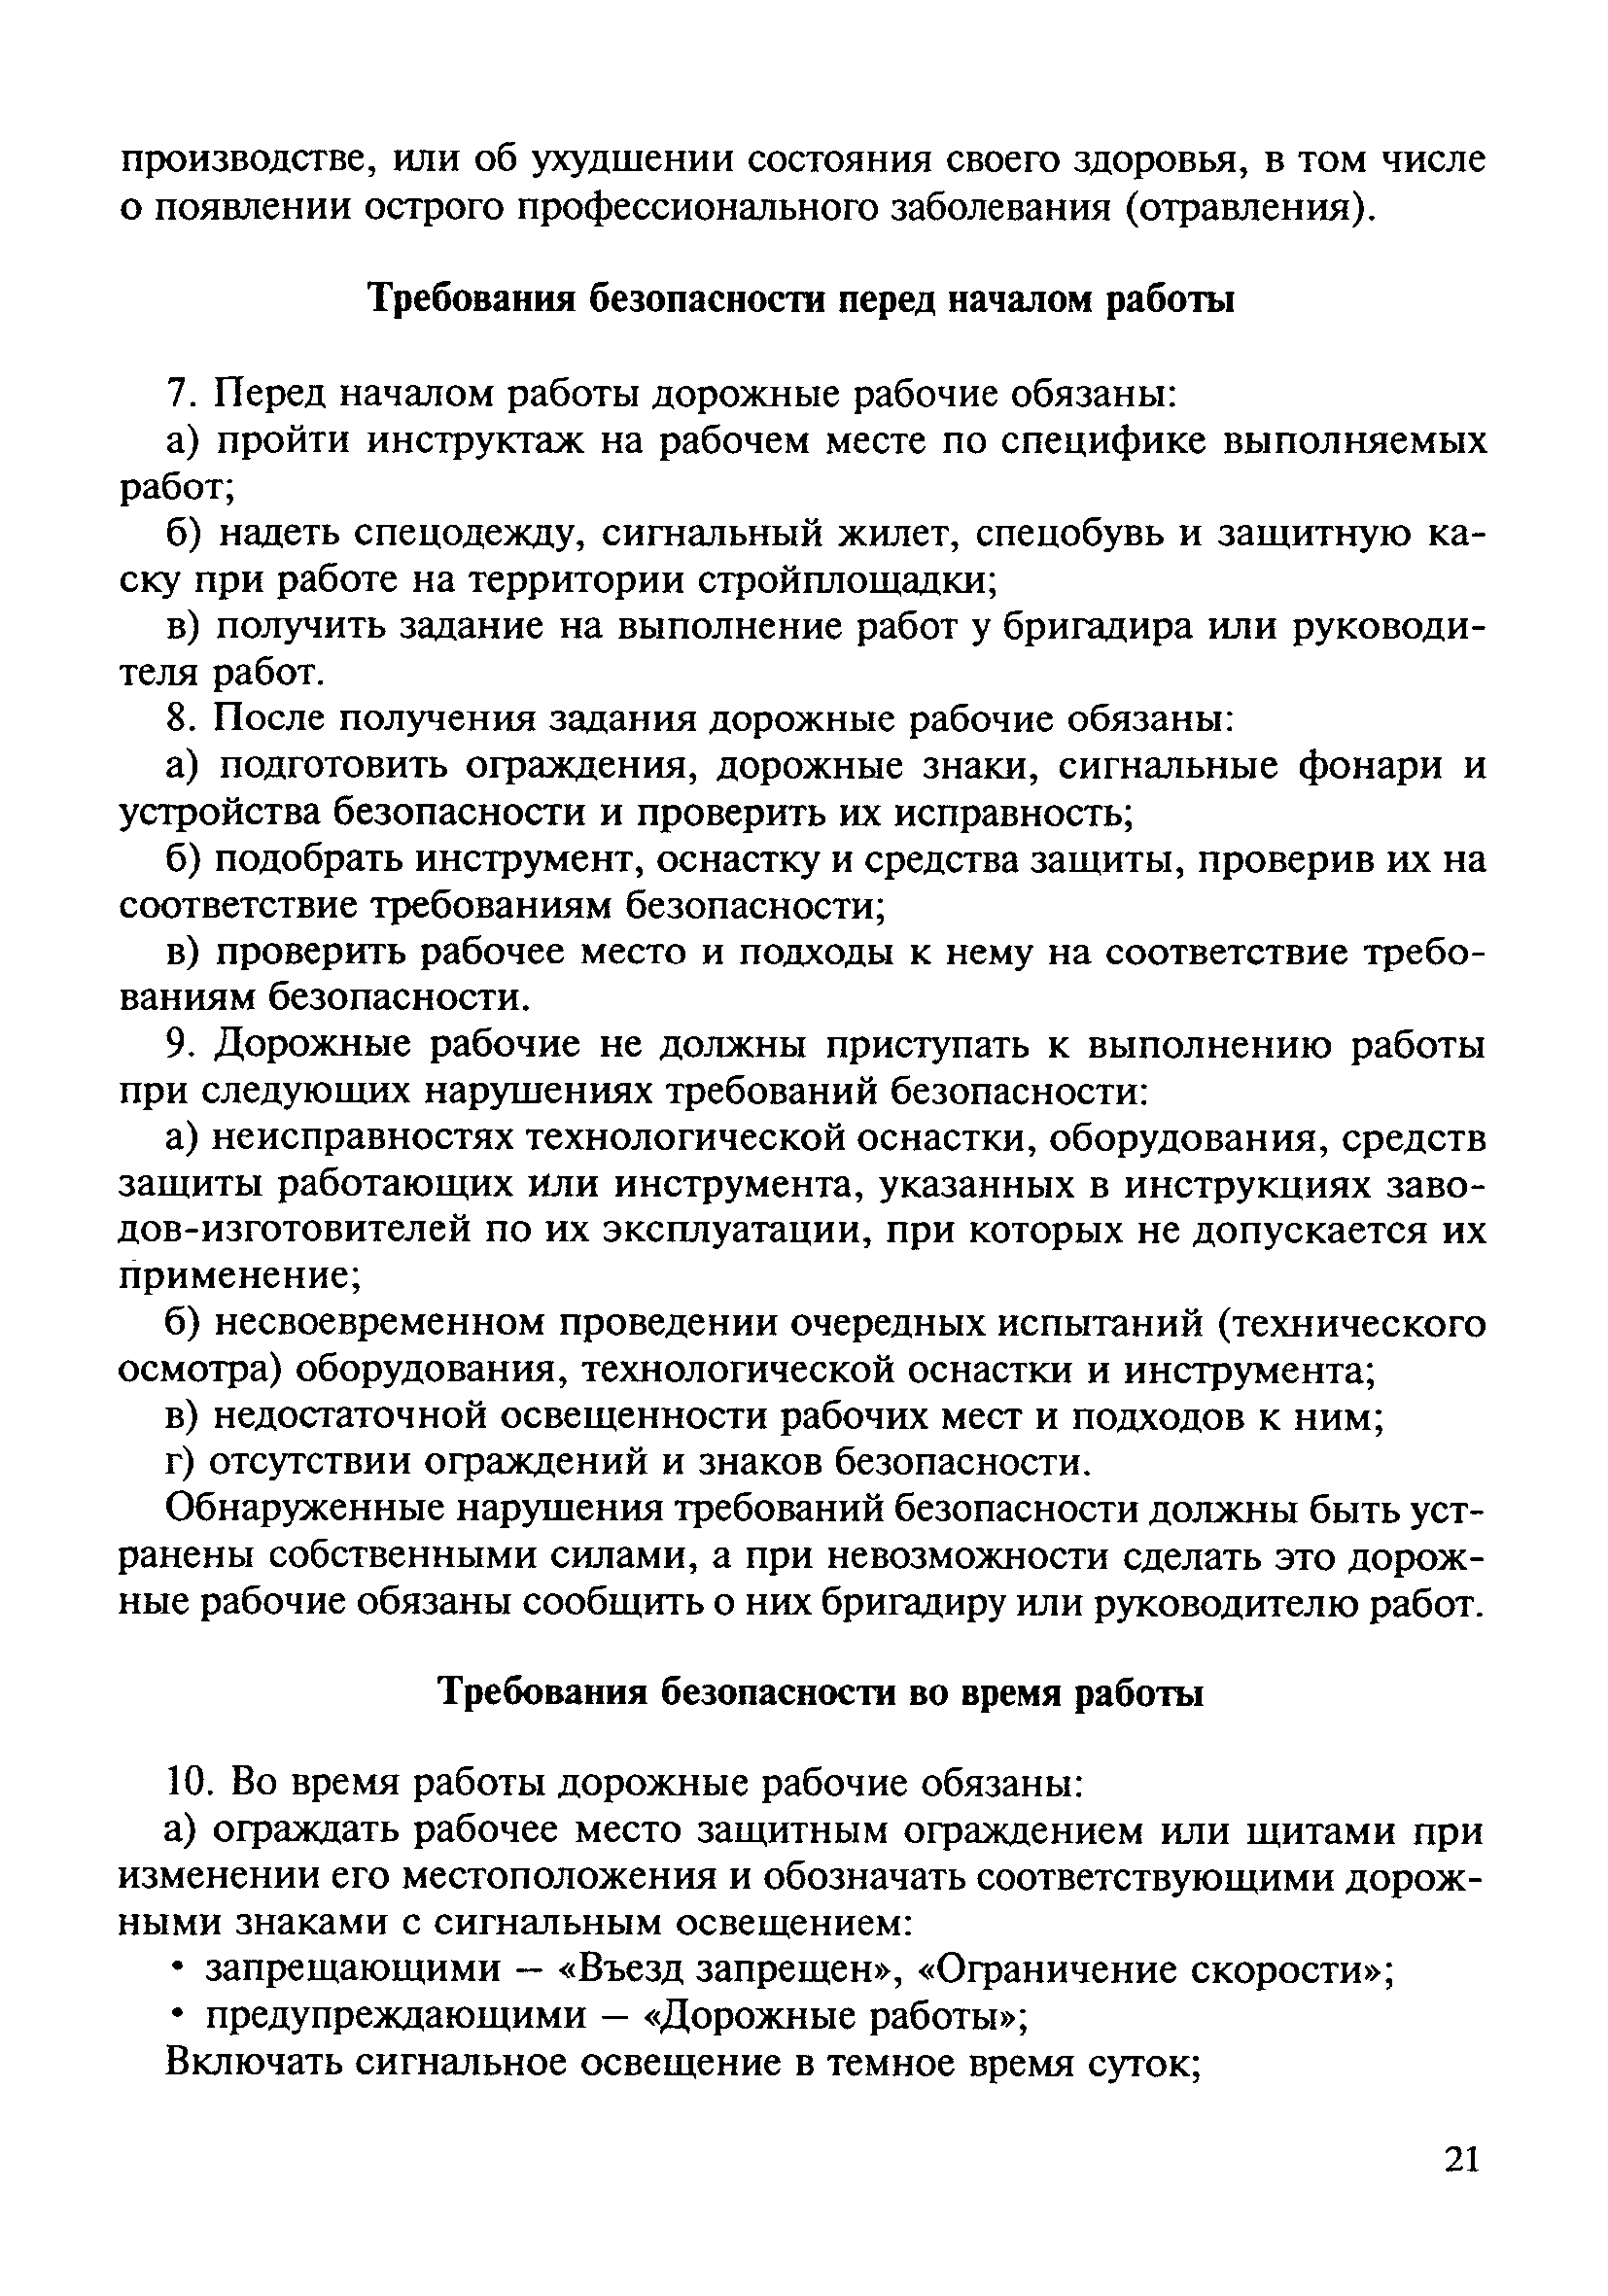 ТИ Р О-007-2003